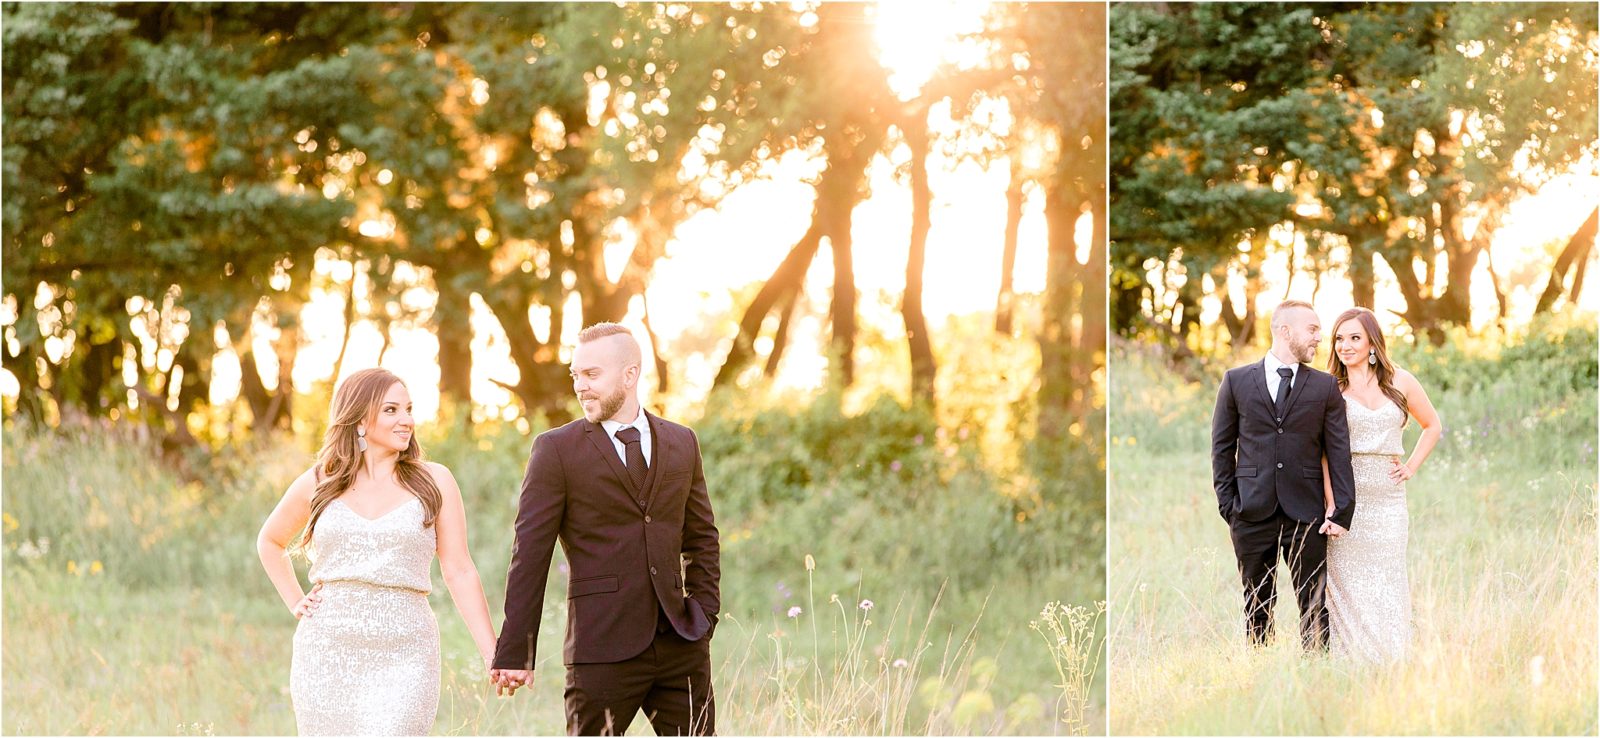 Romantic Outdoor Engagement Session in Dallas, TX by Wedding Photographer www.Jillianhogan.com